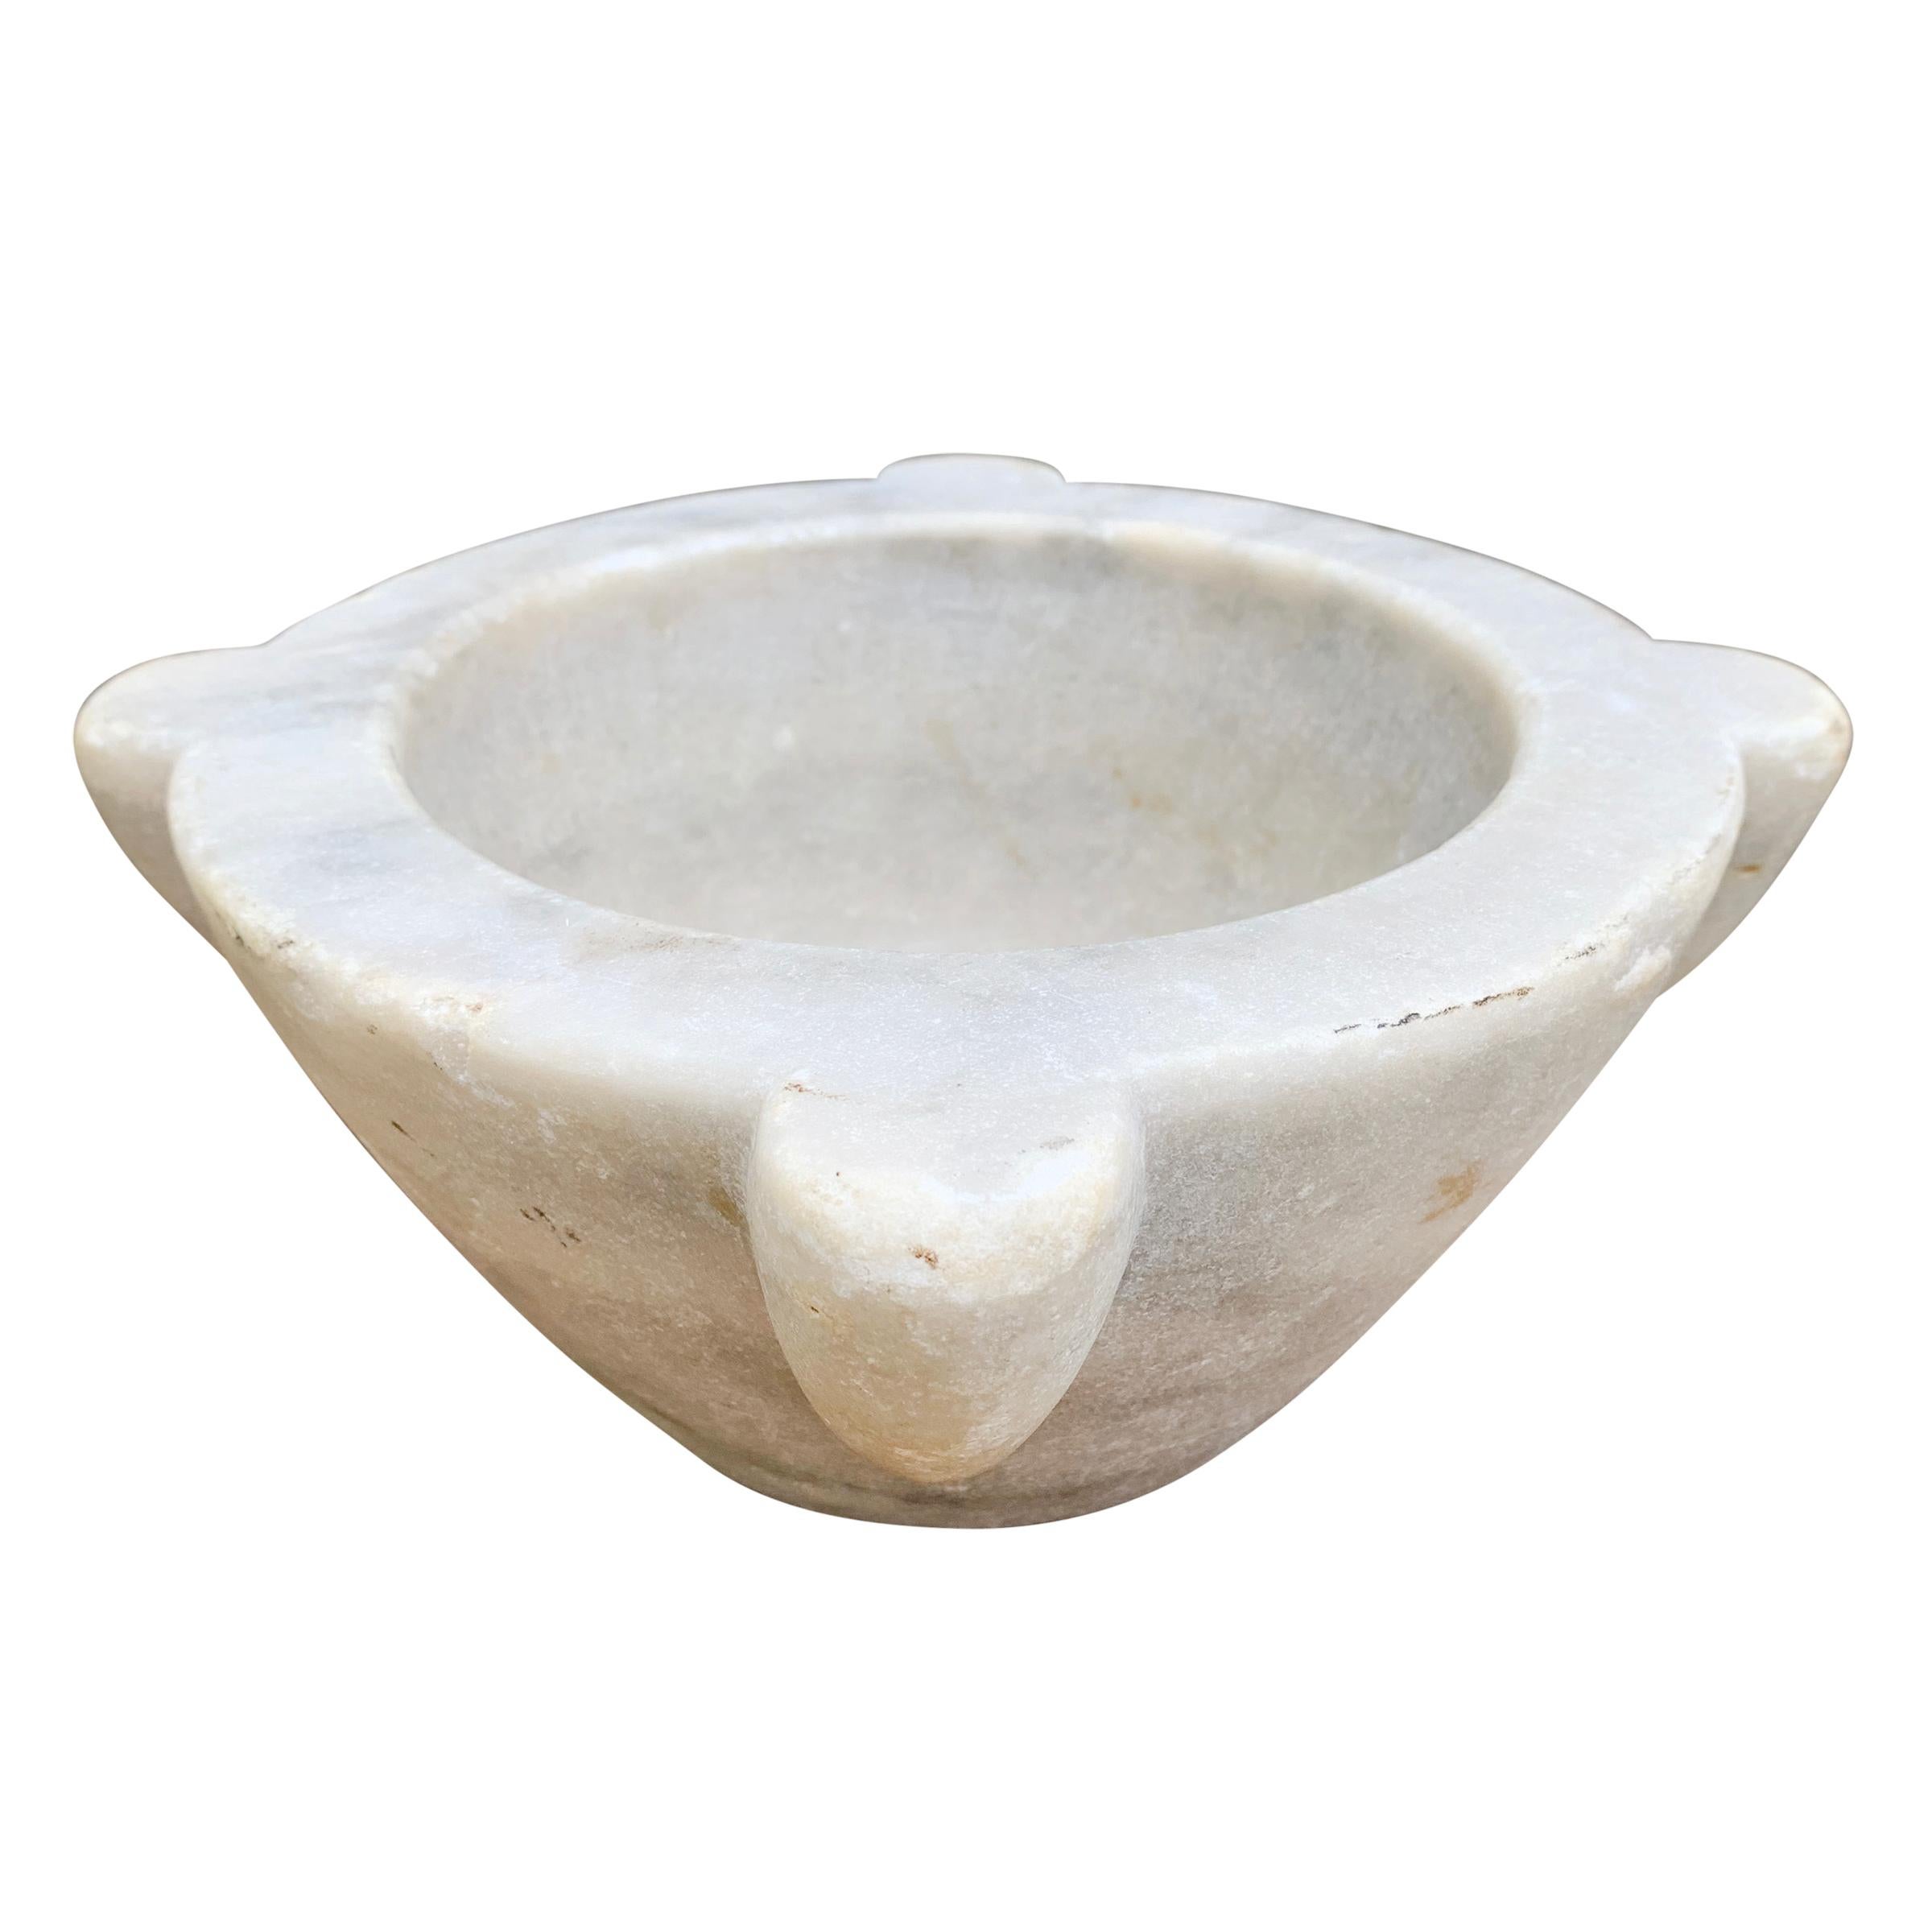 A wonderful early 20th century Italian carved marble mortar originally used to make pesto, now perfect for keeping your salt and pepper at arm’s reach, crushing other herbs and spices, or serving chips at your next fête.